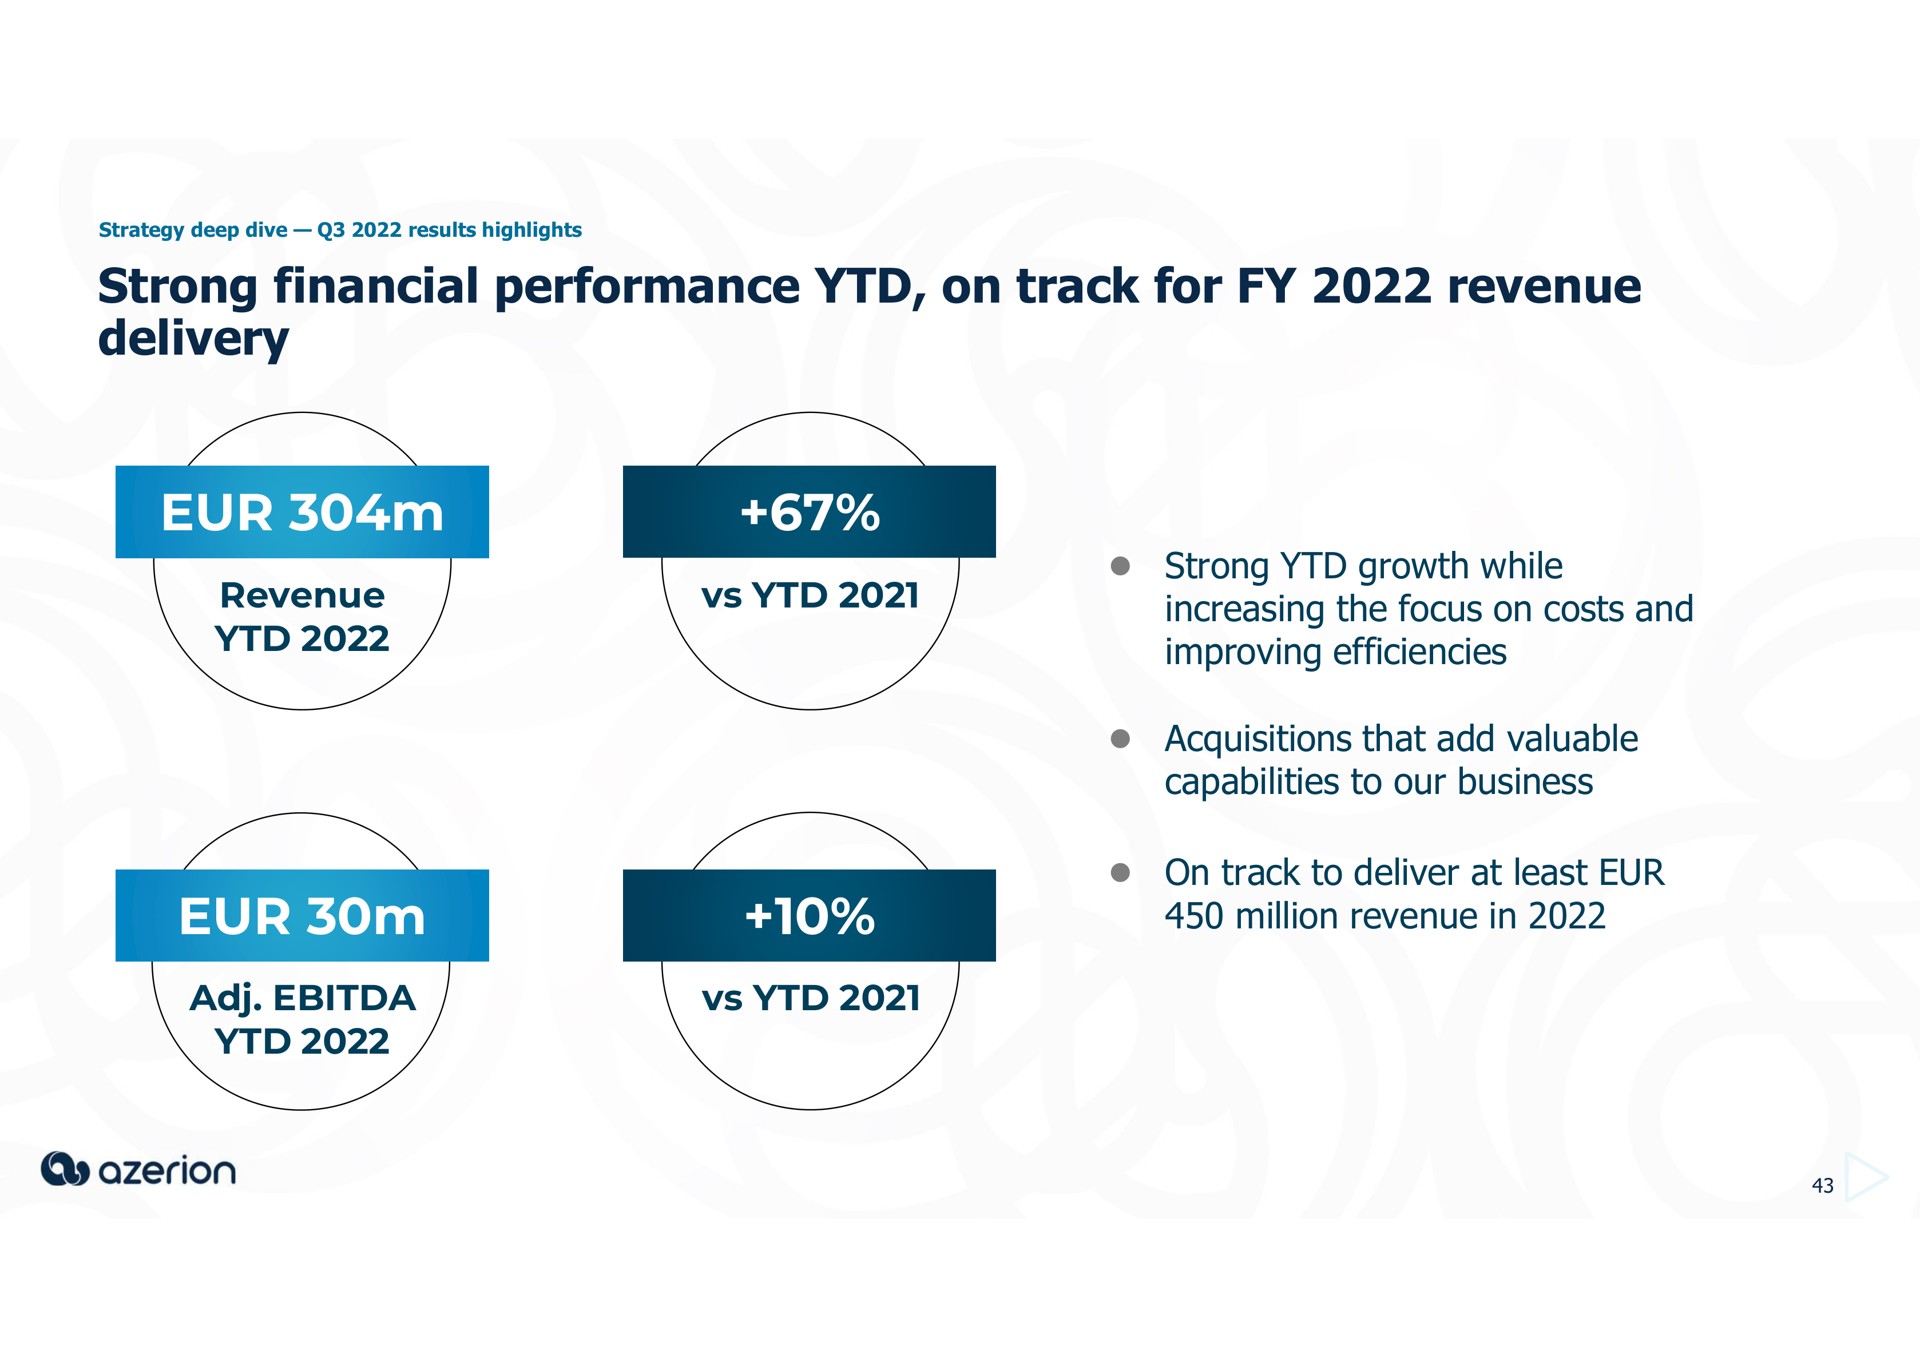 strong financial performance on track for revenue delivery revenue strong growth while increasing the focus on costs and improving efficiencies acquisitions that add valuable capabilities to our business on track to deliver at least million revenue in | Azerion